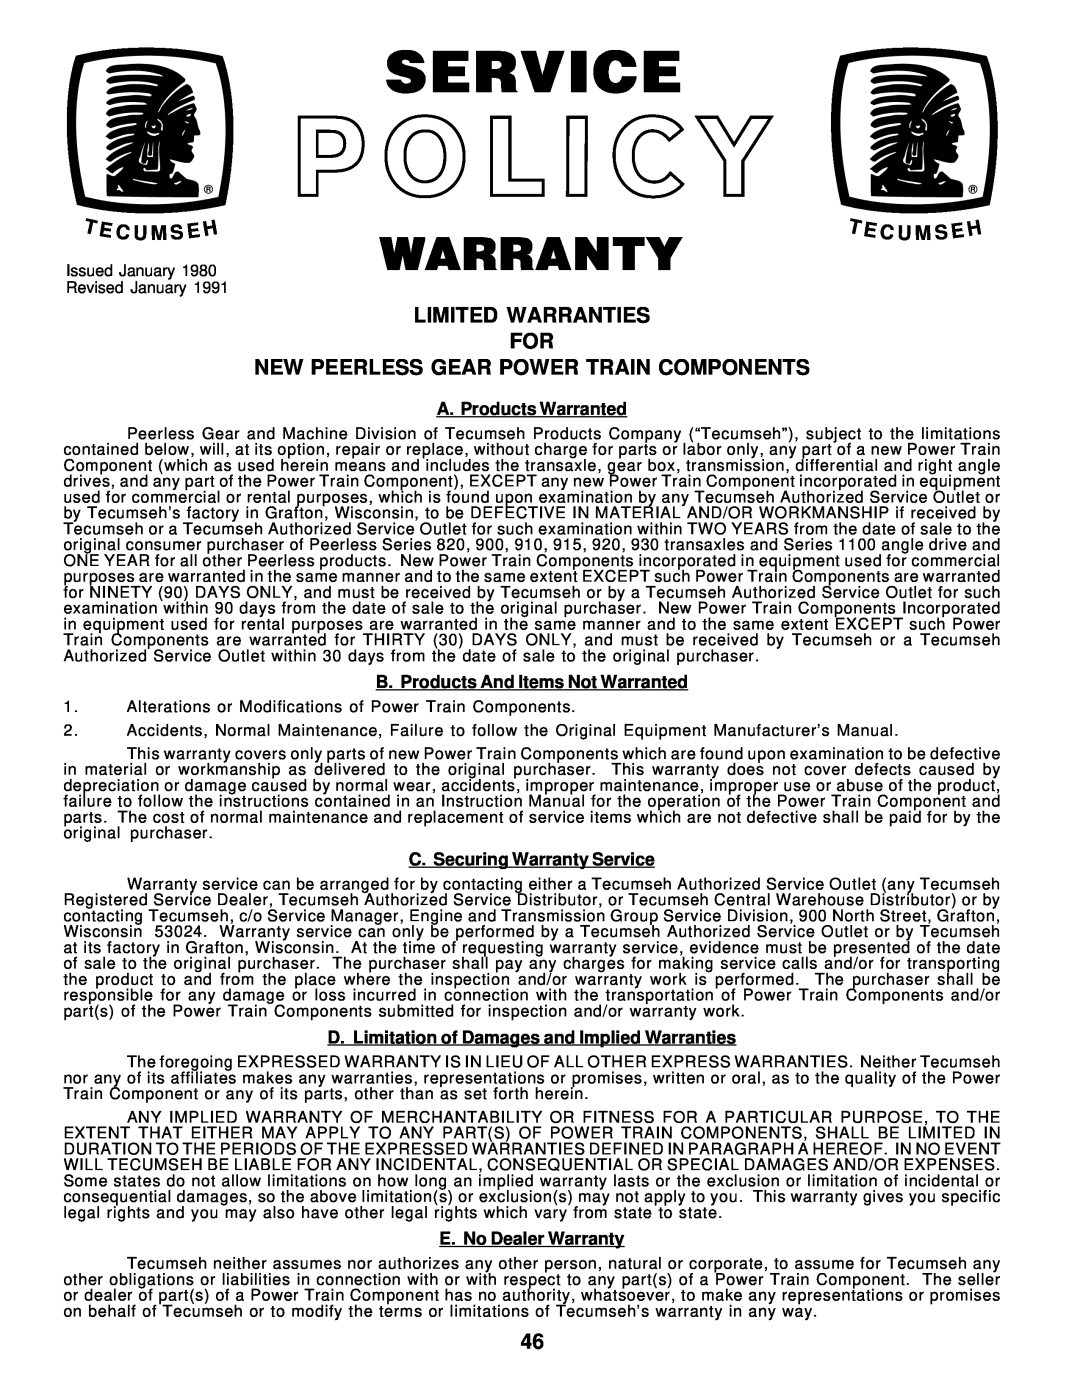 Weed Eater 171883 Limited Warranties For New Peerless Gear Power Train Components, T E C U M S Eh, A. Products Warranted 